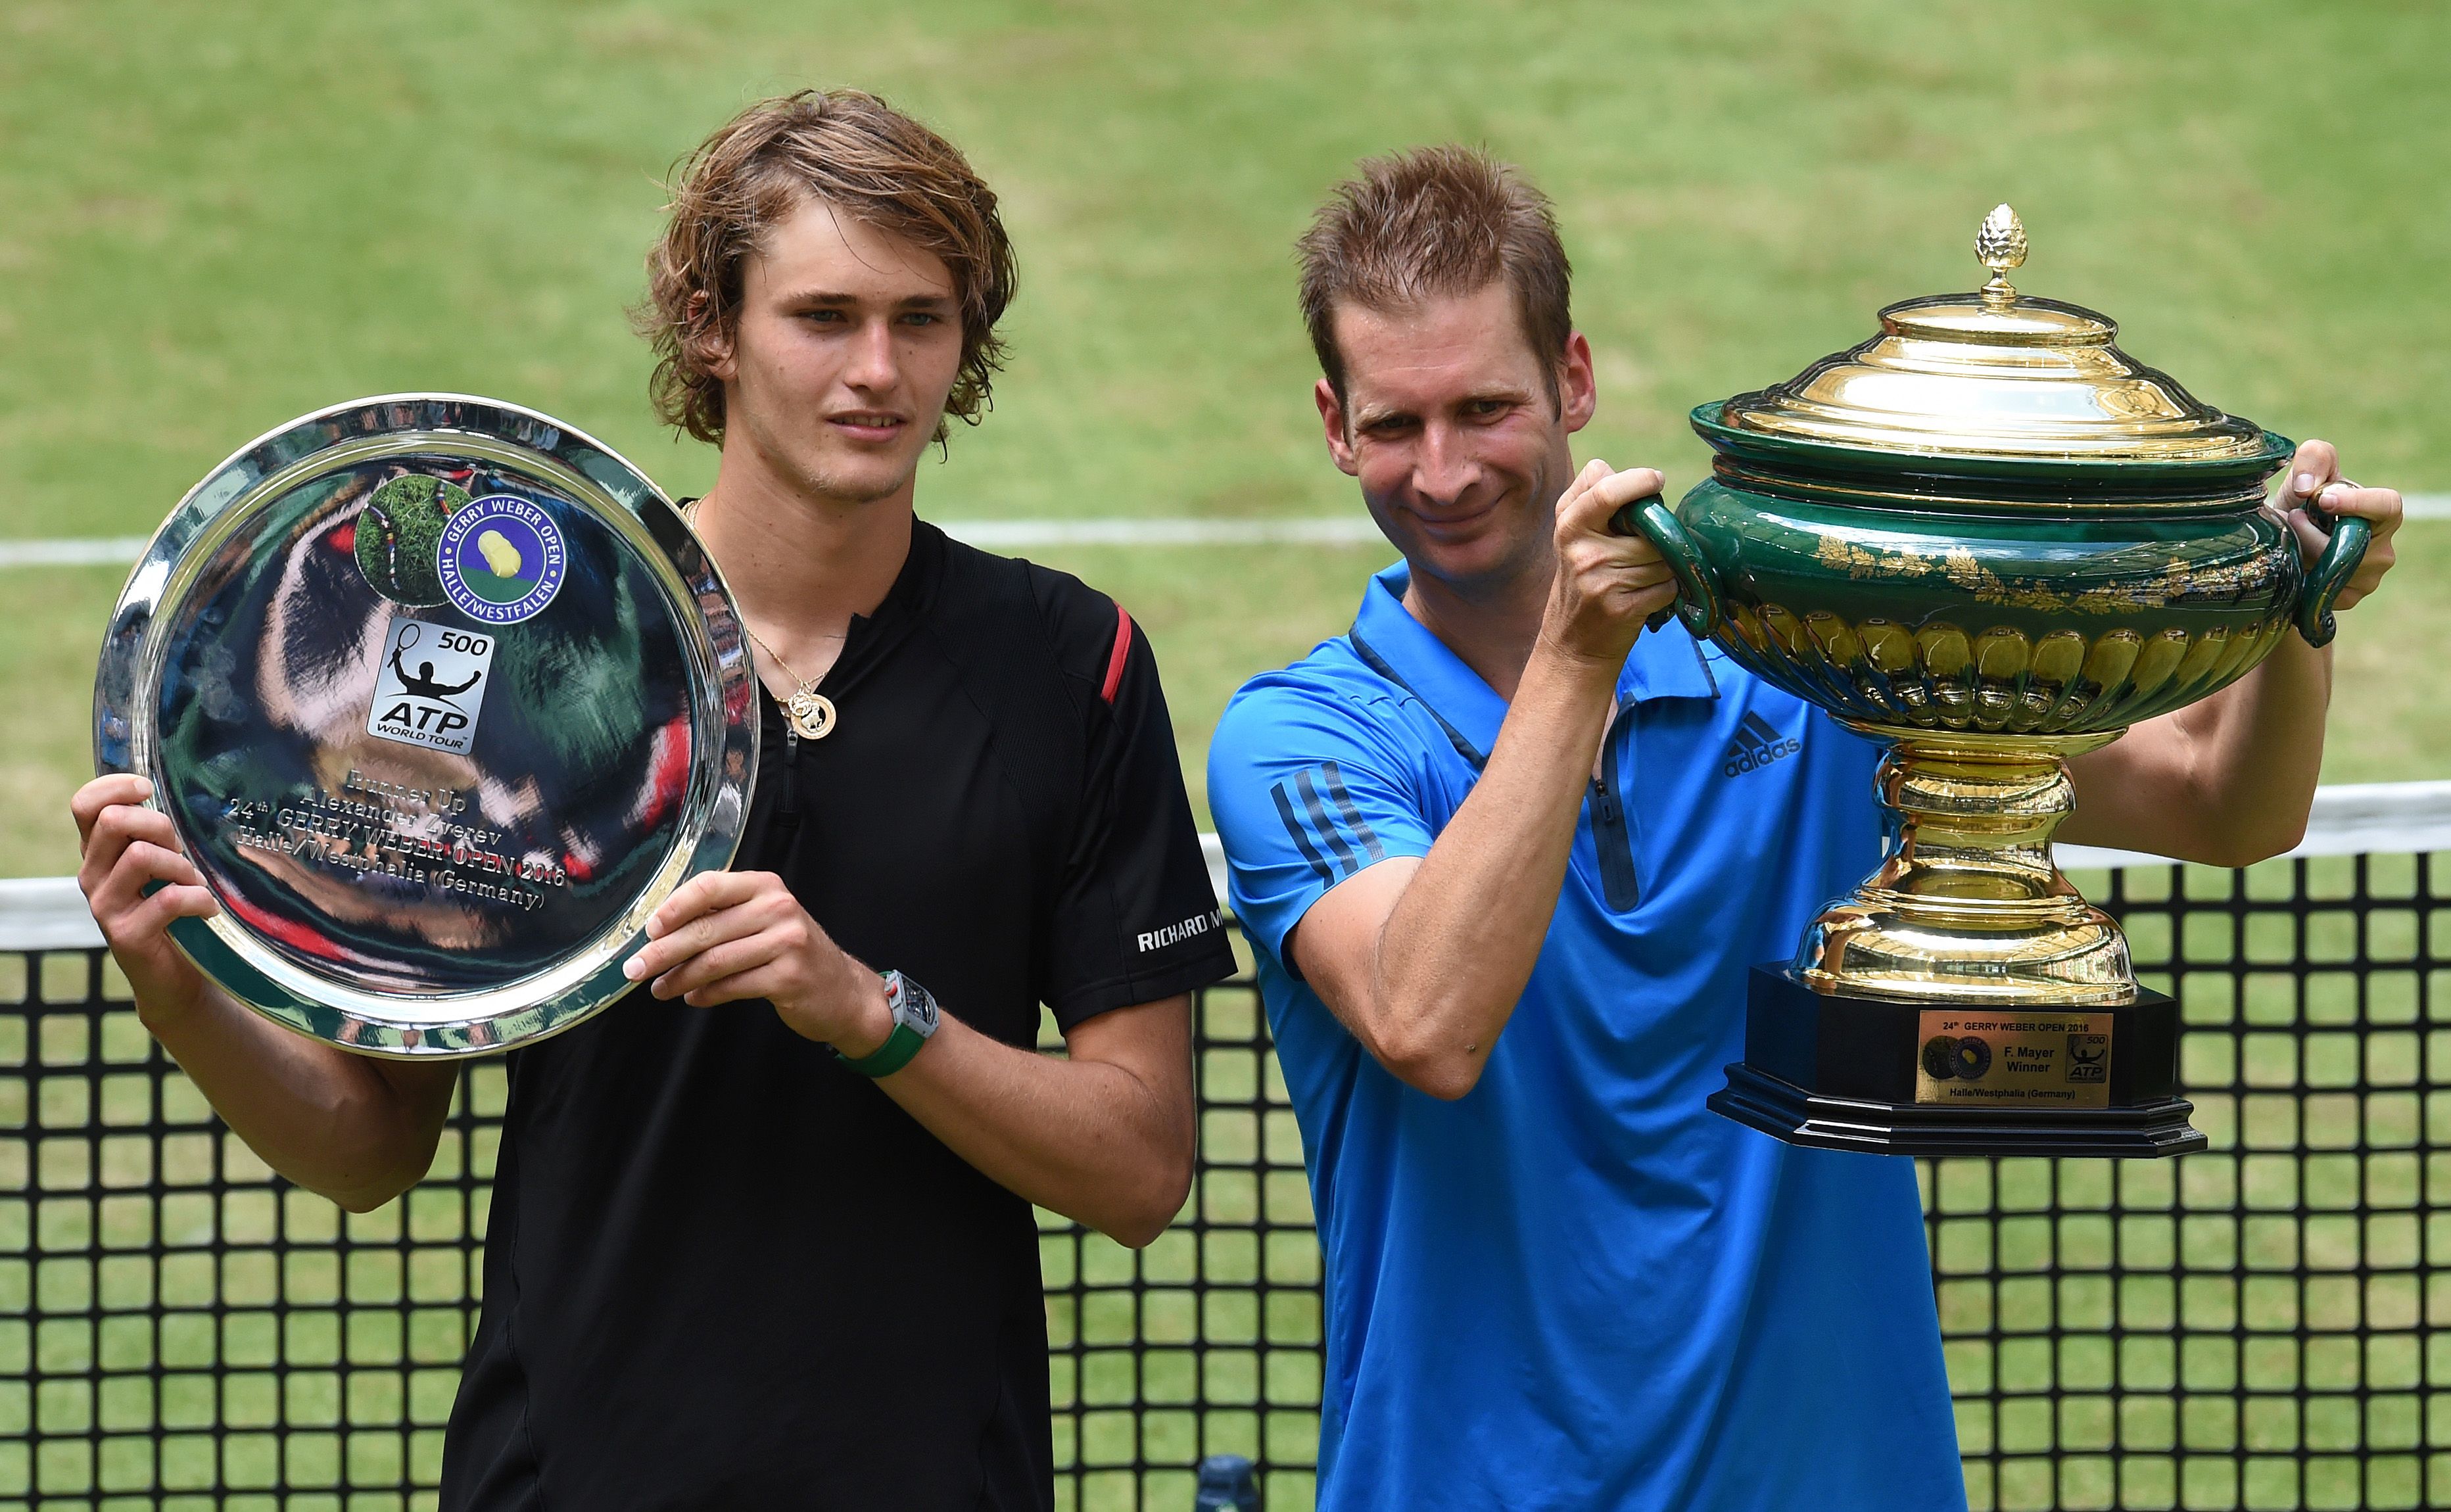 Tennis: Mayer puts injury struggles behind him to win Halle title